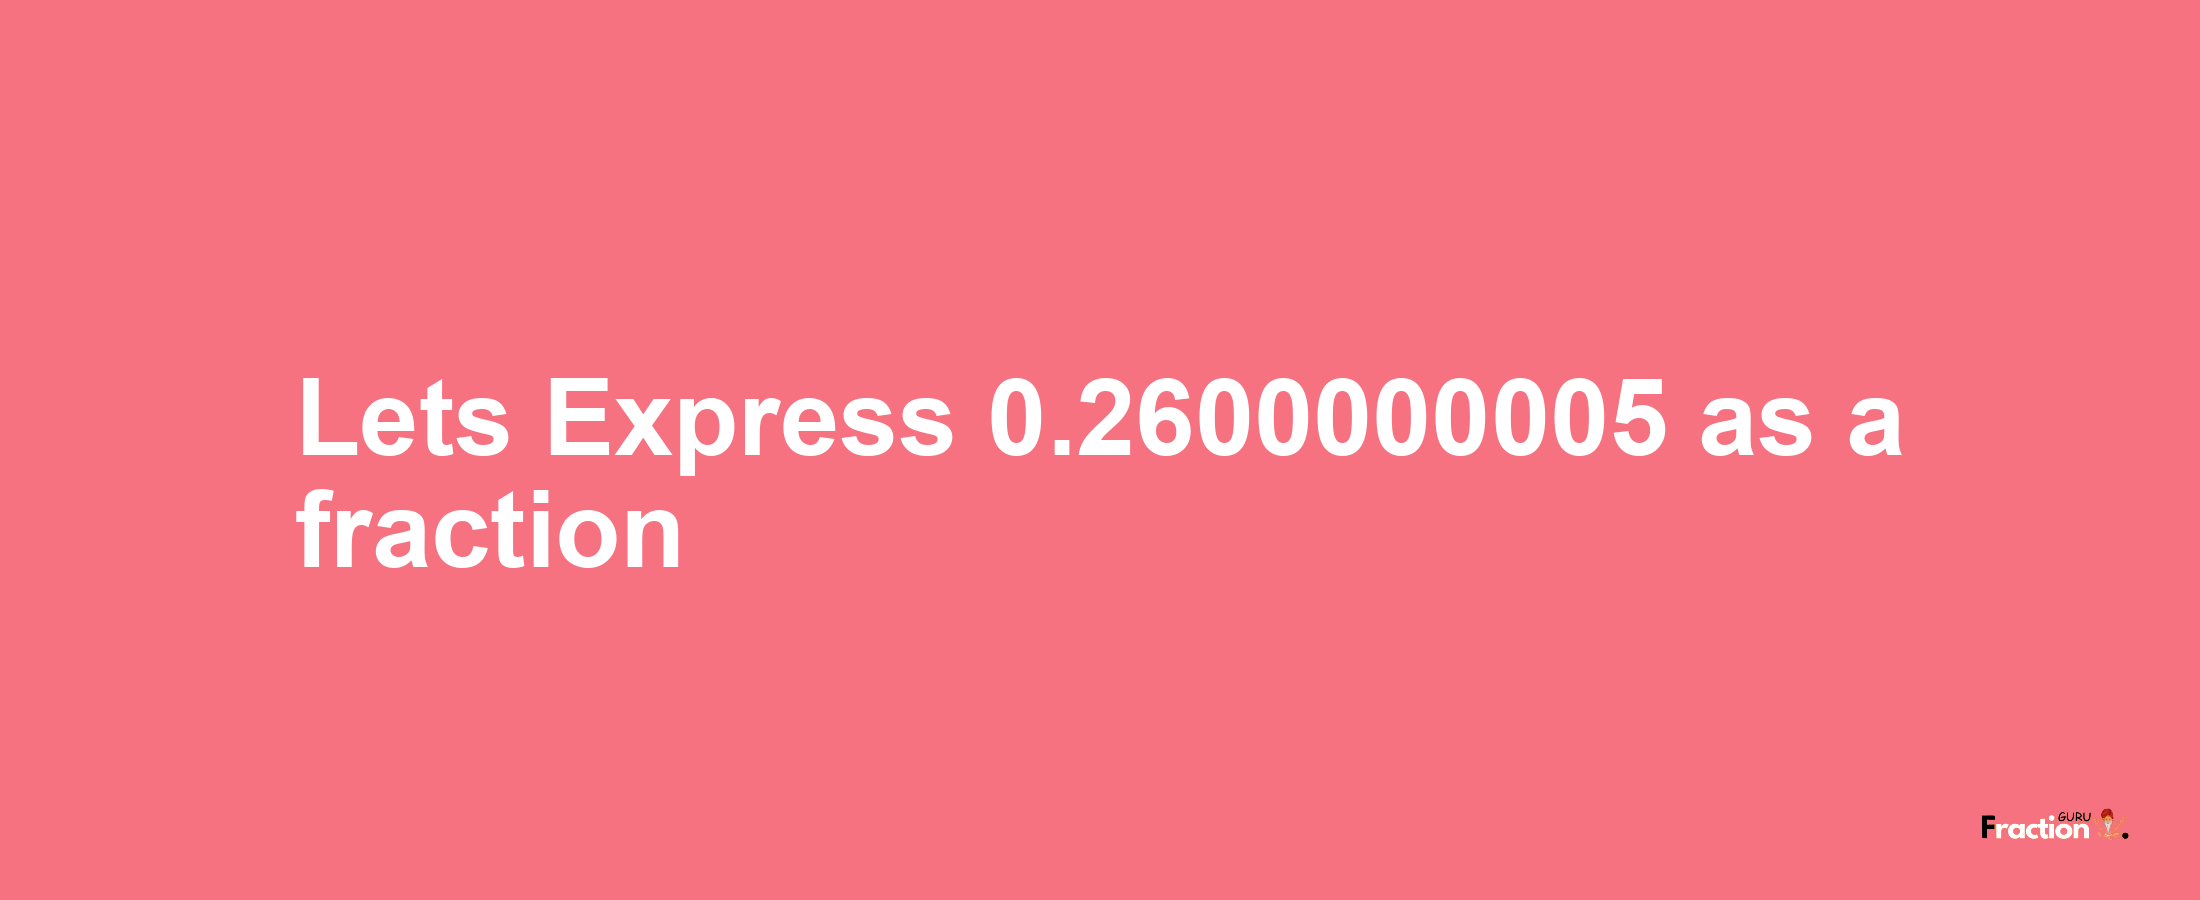 Lets Express 0.2600000005 as afraction